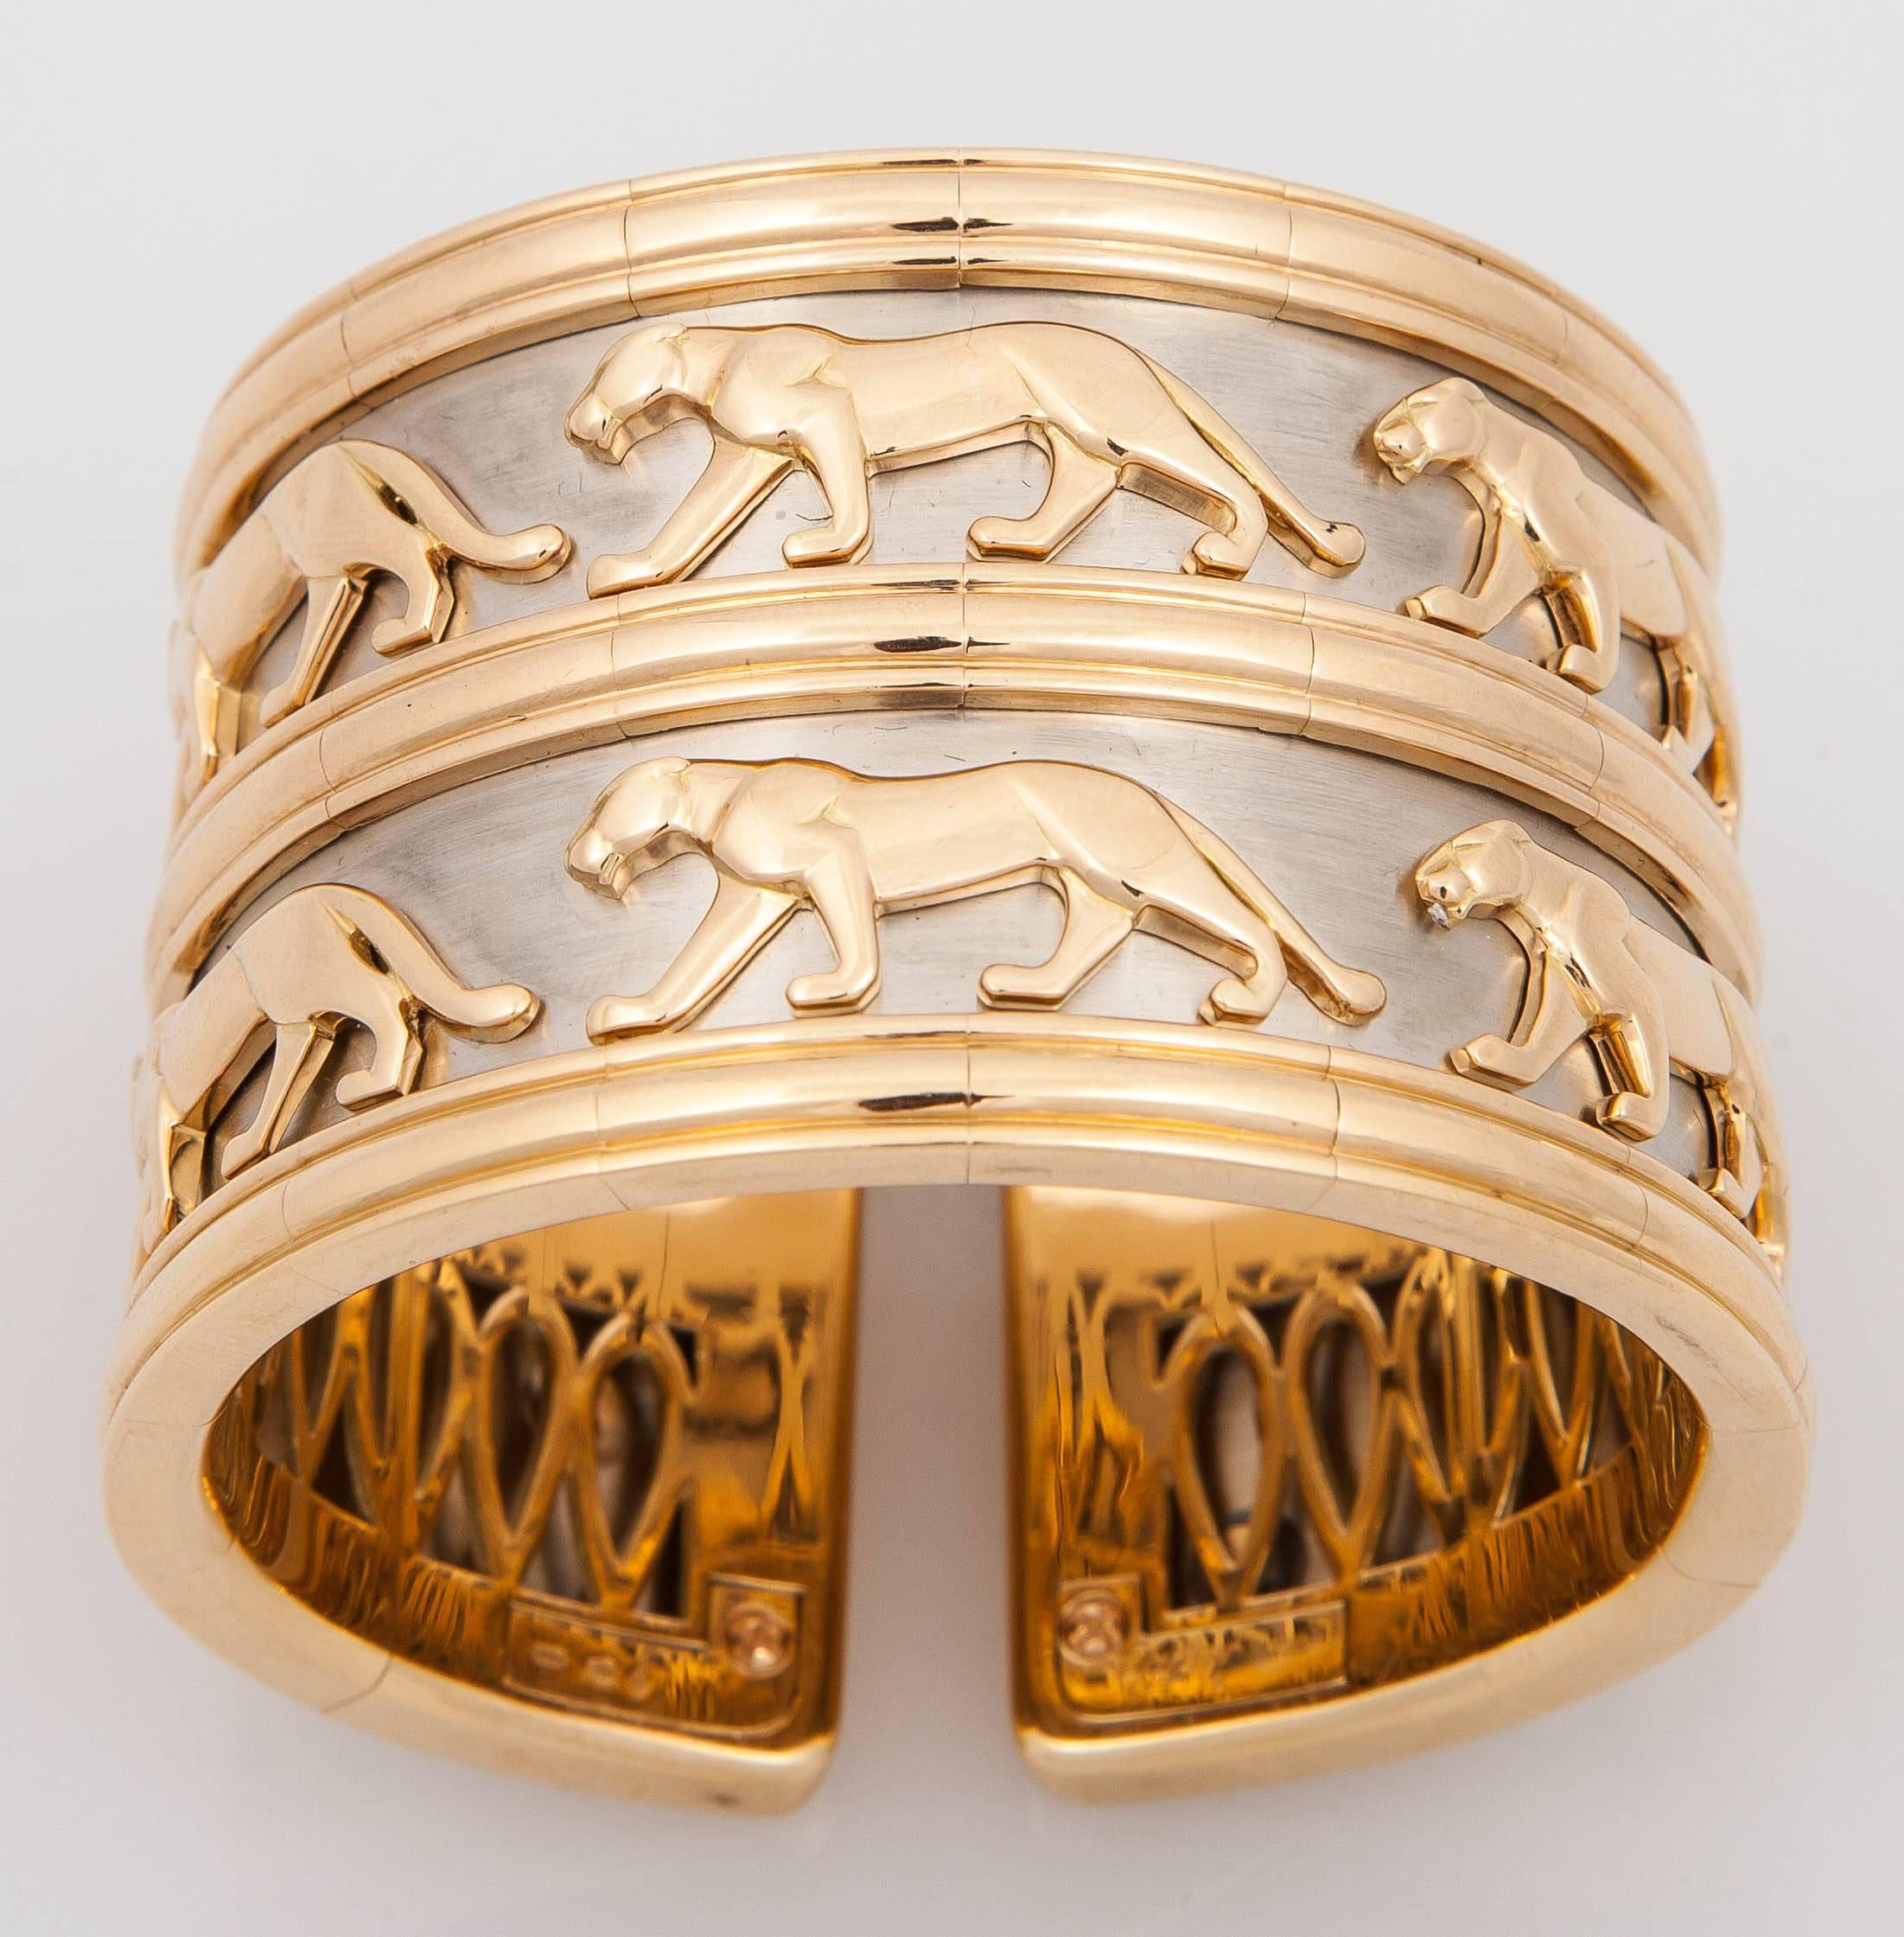 This incredibly rare Vintage Cartier Panthere  Bracelet.  It is  finely decorated with the iconic Cartier Panthere design in 18k Yellow Gold, set on a white metal. The bracelet cuff however has two rows of the Panthere design.